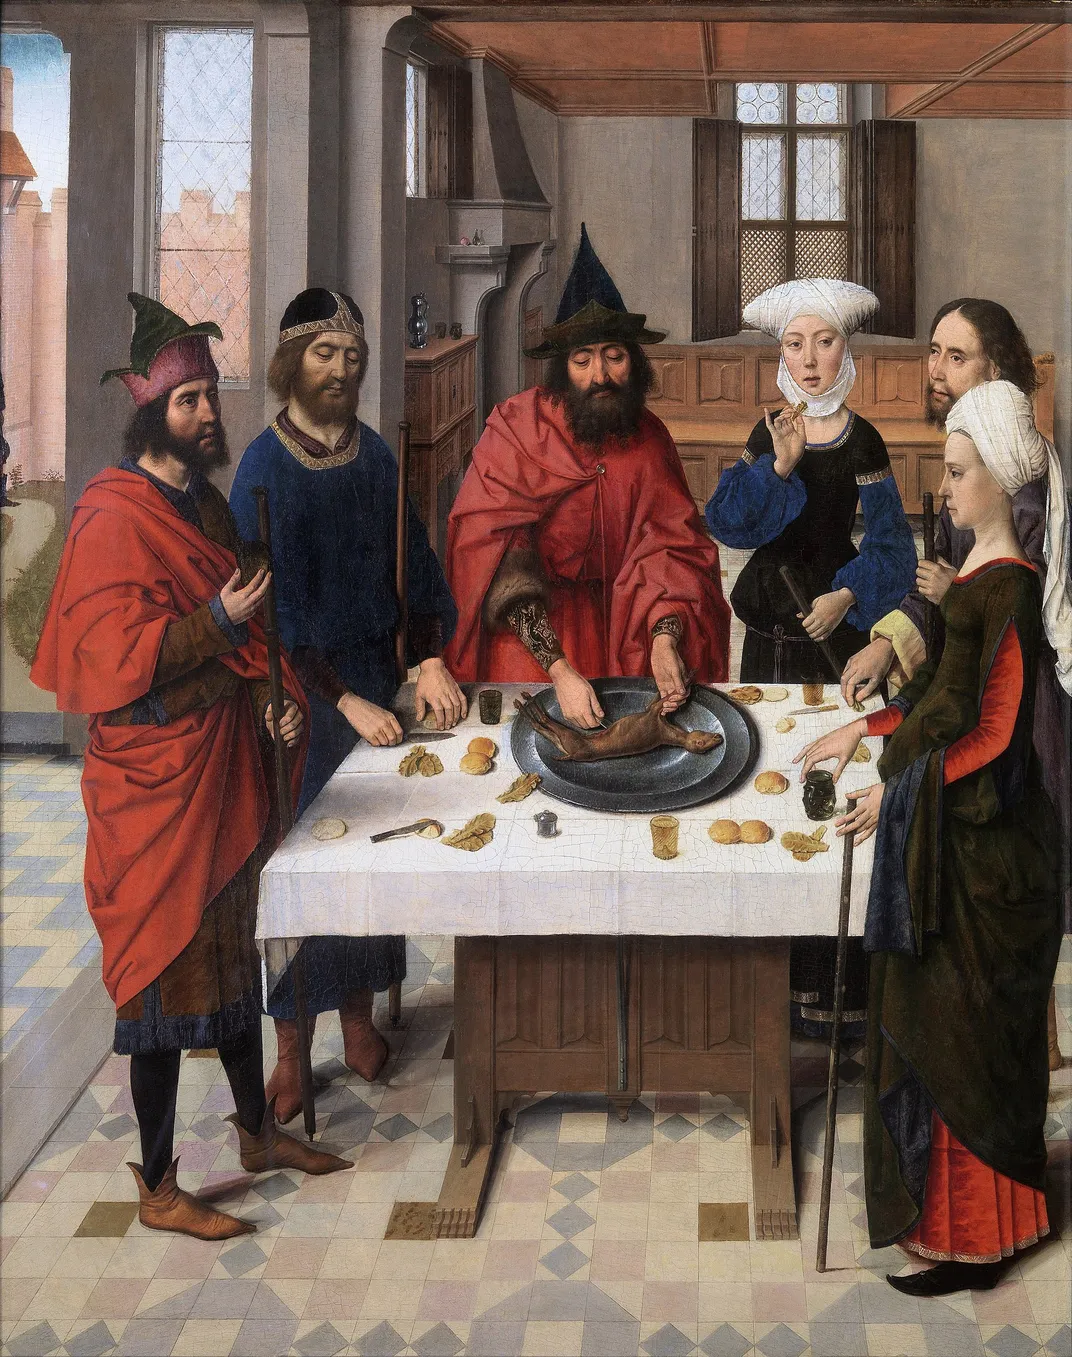 A 15th-century painting of a Passover celebration by Dieric Bouts